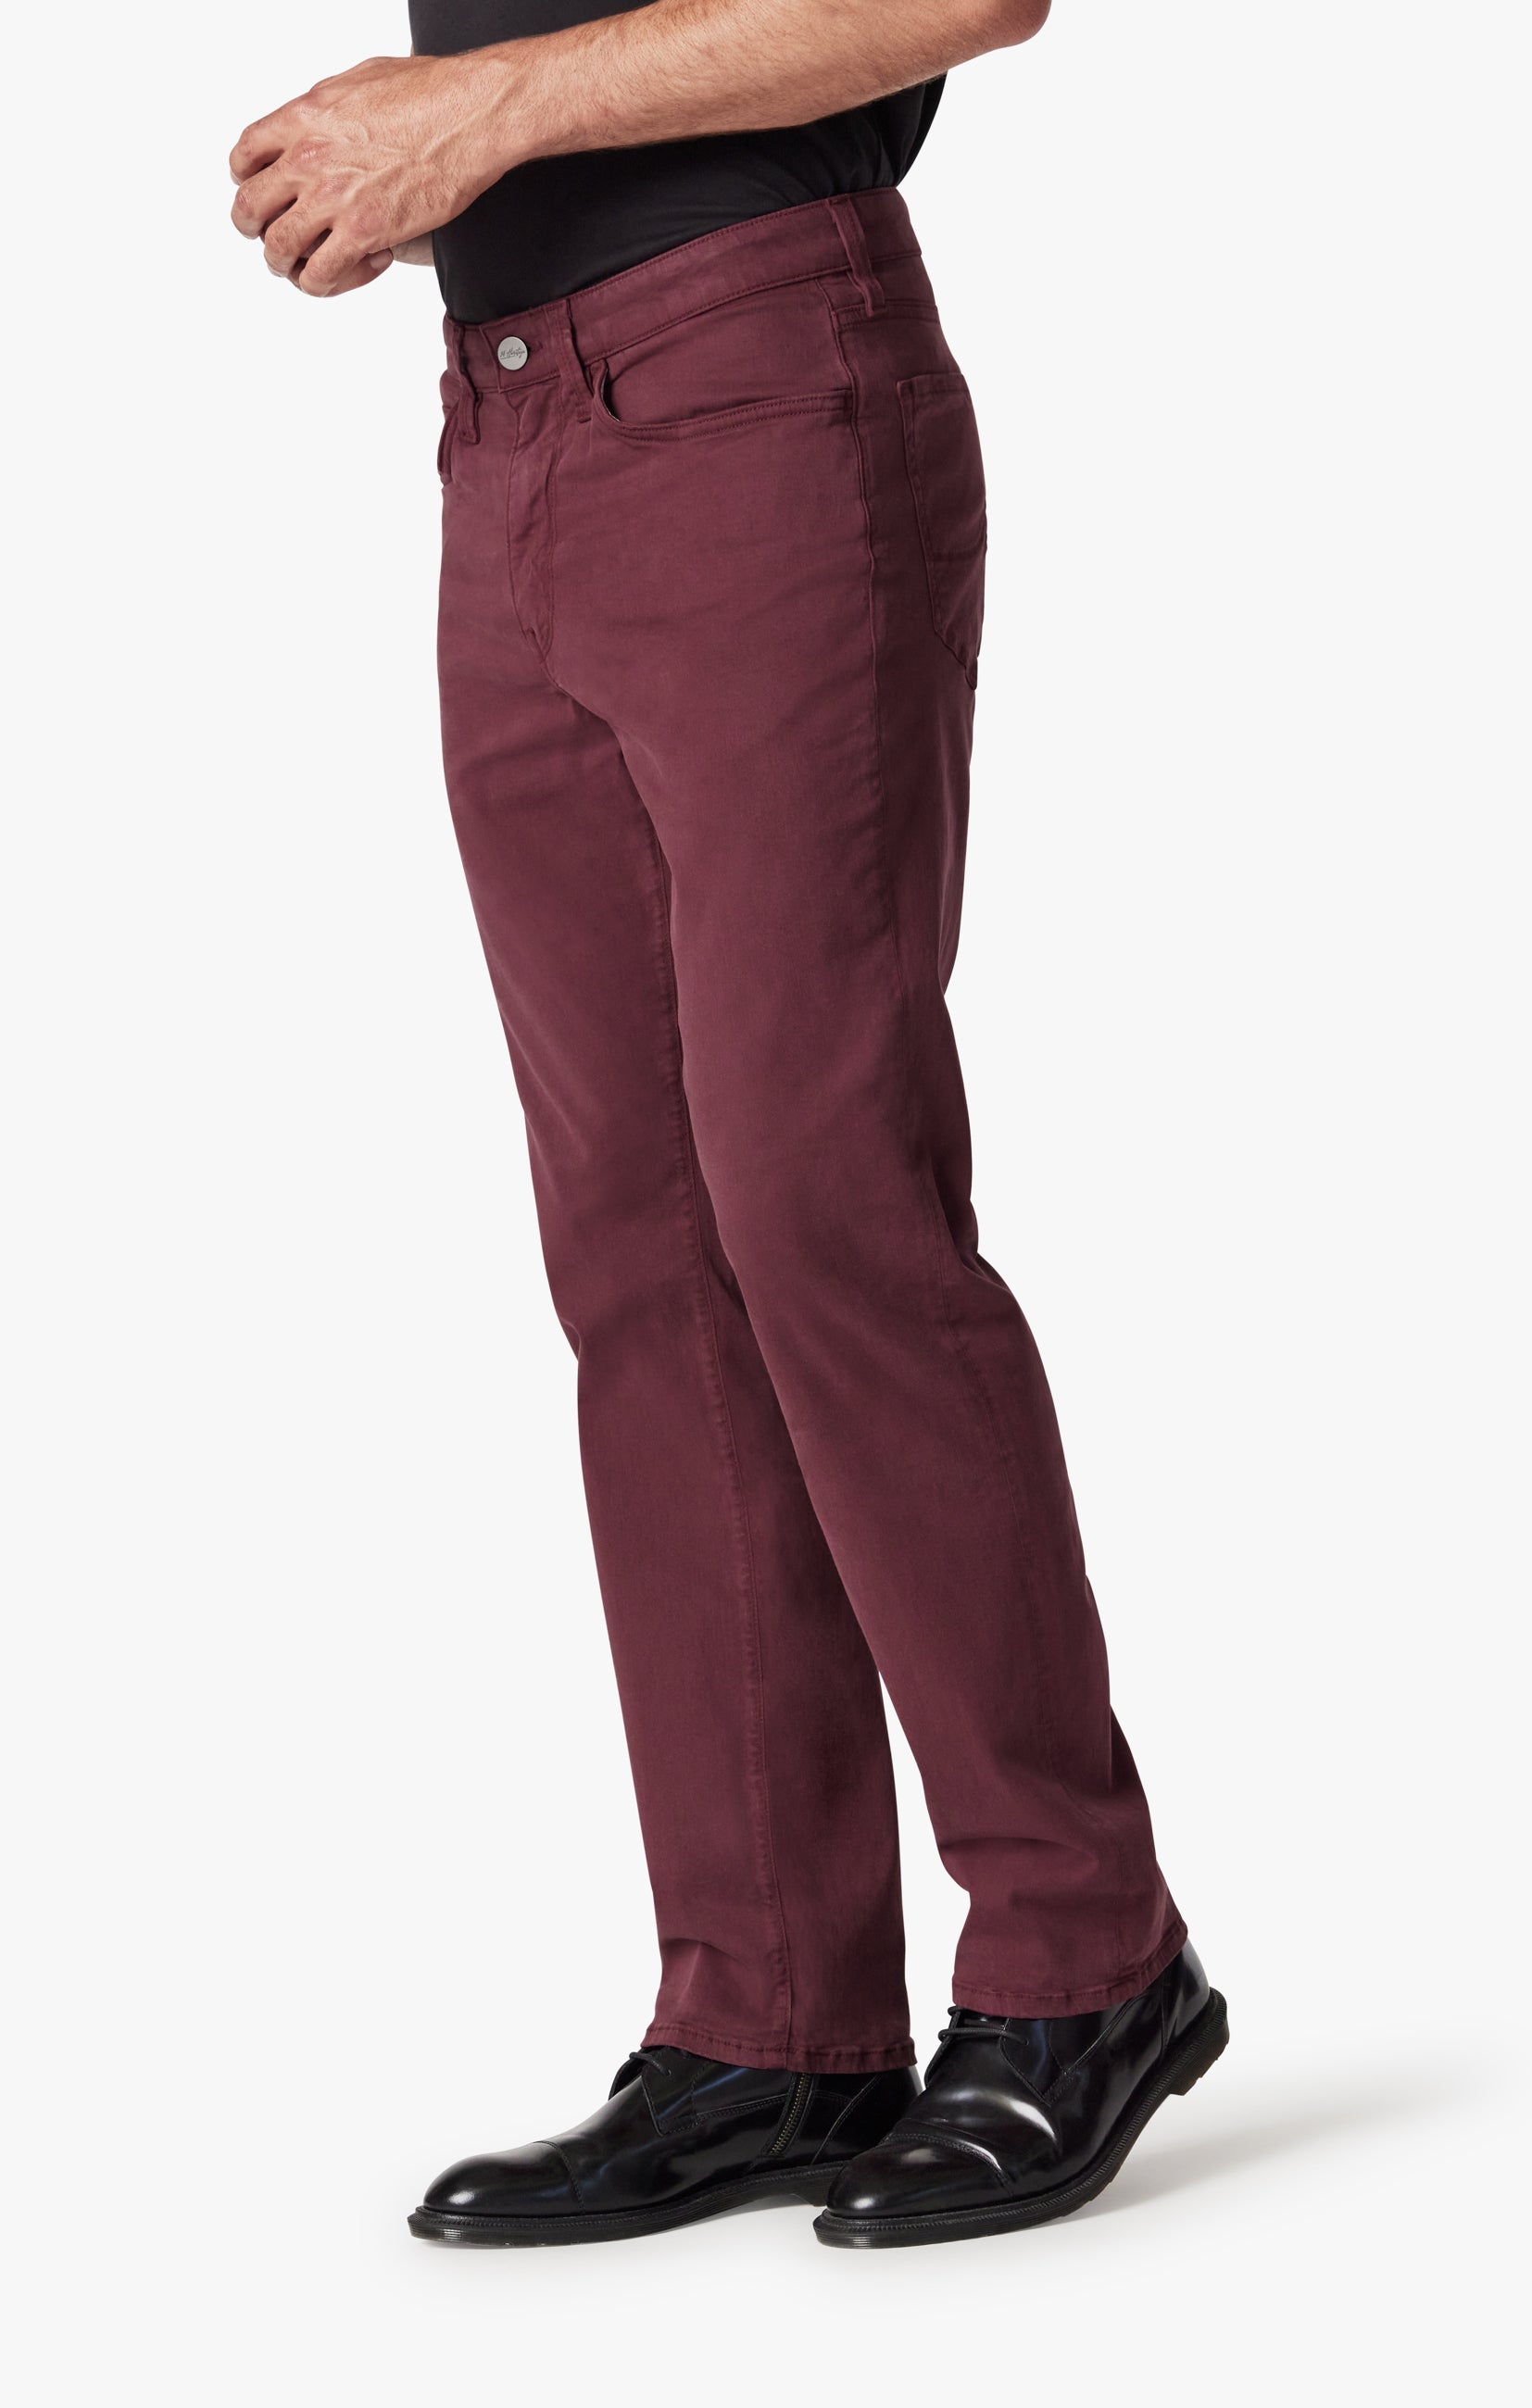 Charisma Relaxed Straight Leg Pants In Tawny Port Twill Image 5